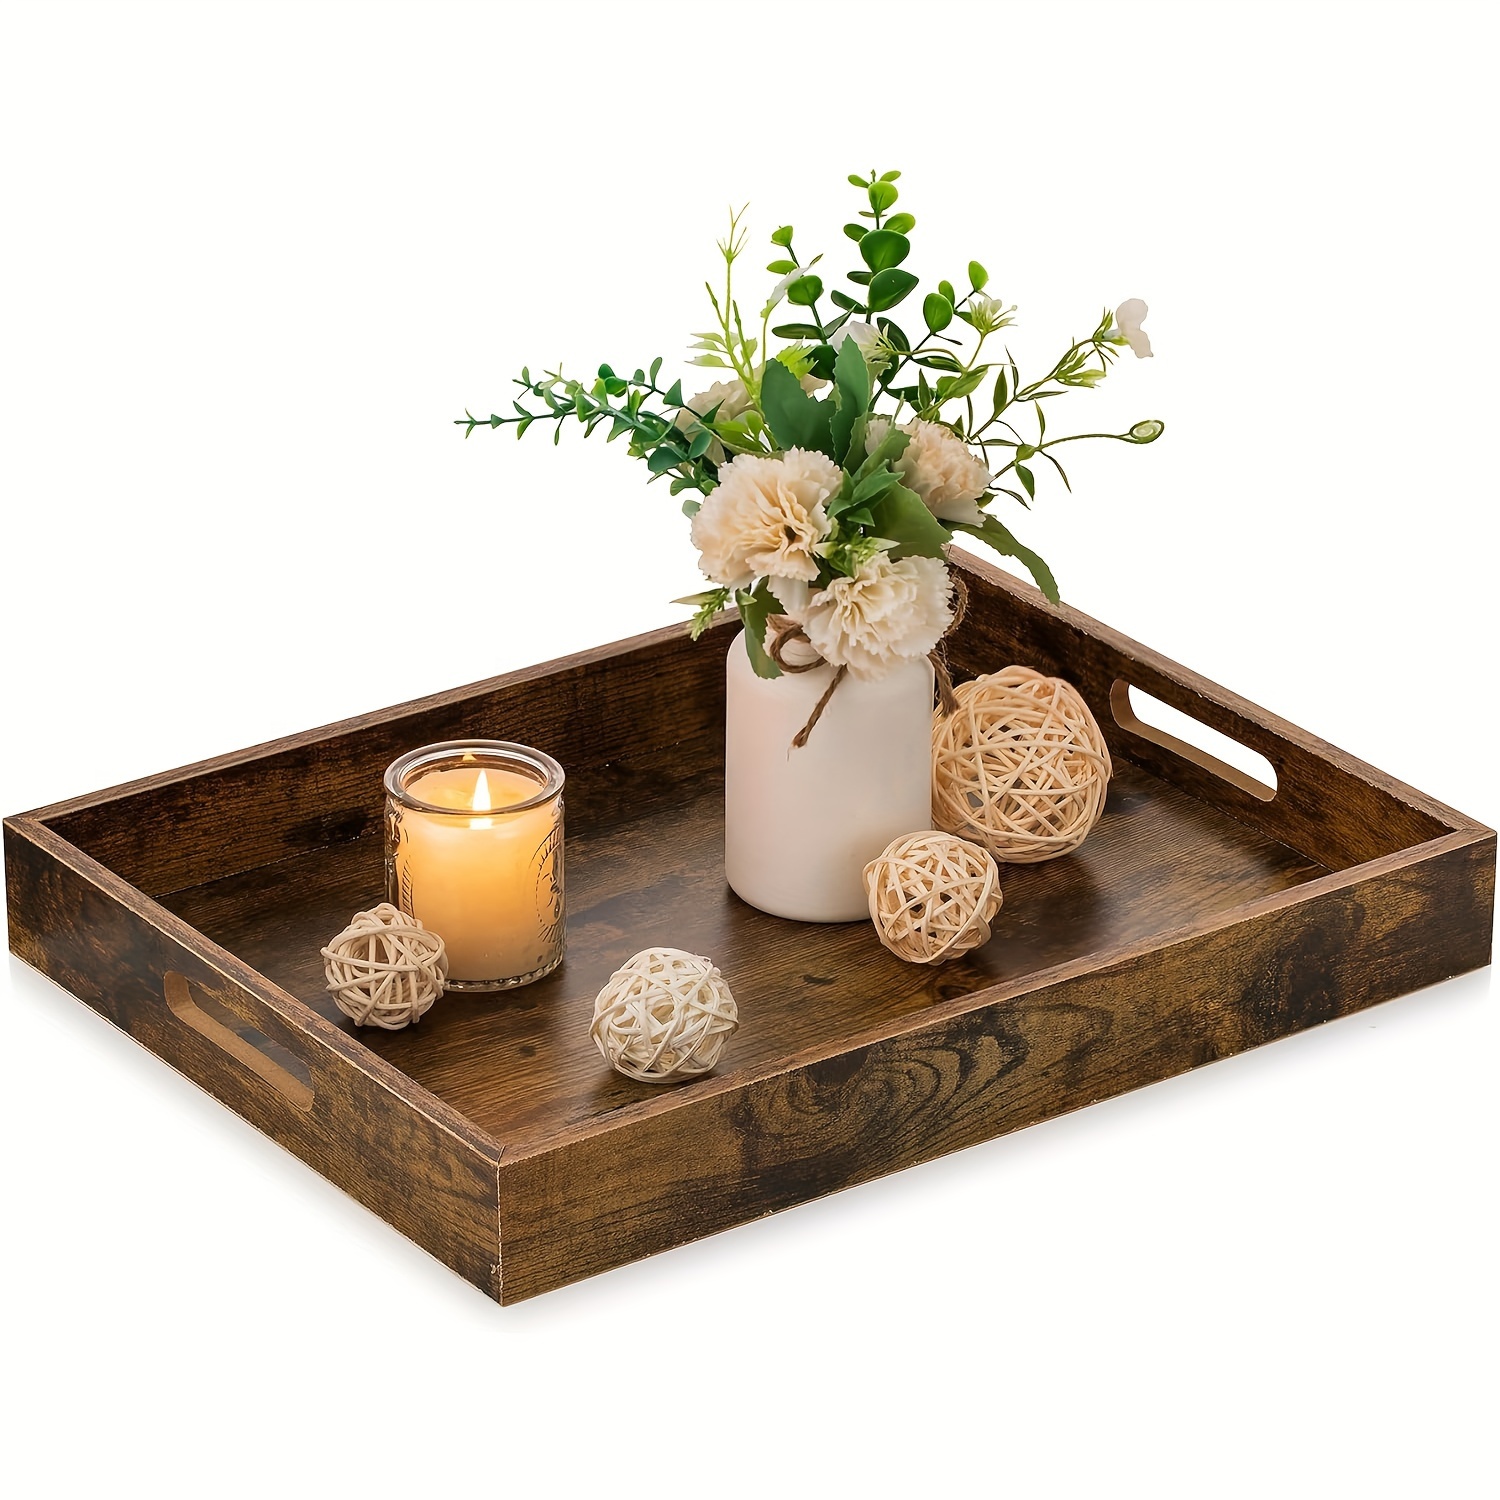 Round Wood Tray/w Wood Bead Garland - 13 Decorative Trays for Home Decor -  Round Wooden Tray with Handles - Wooden Round Tray for Kitchen Counter.